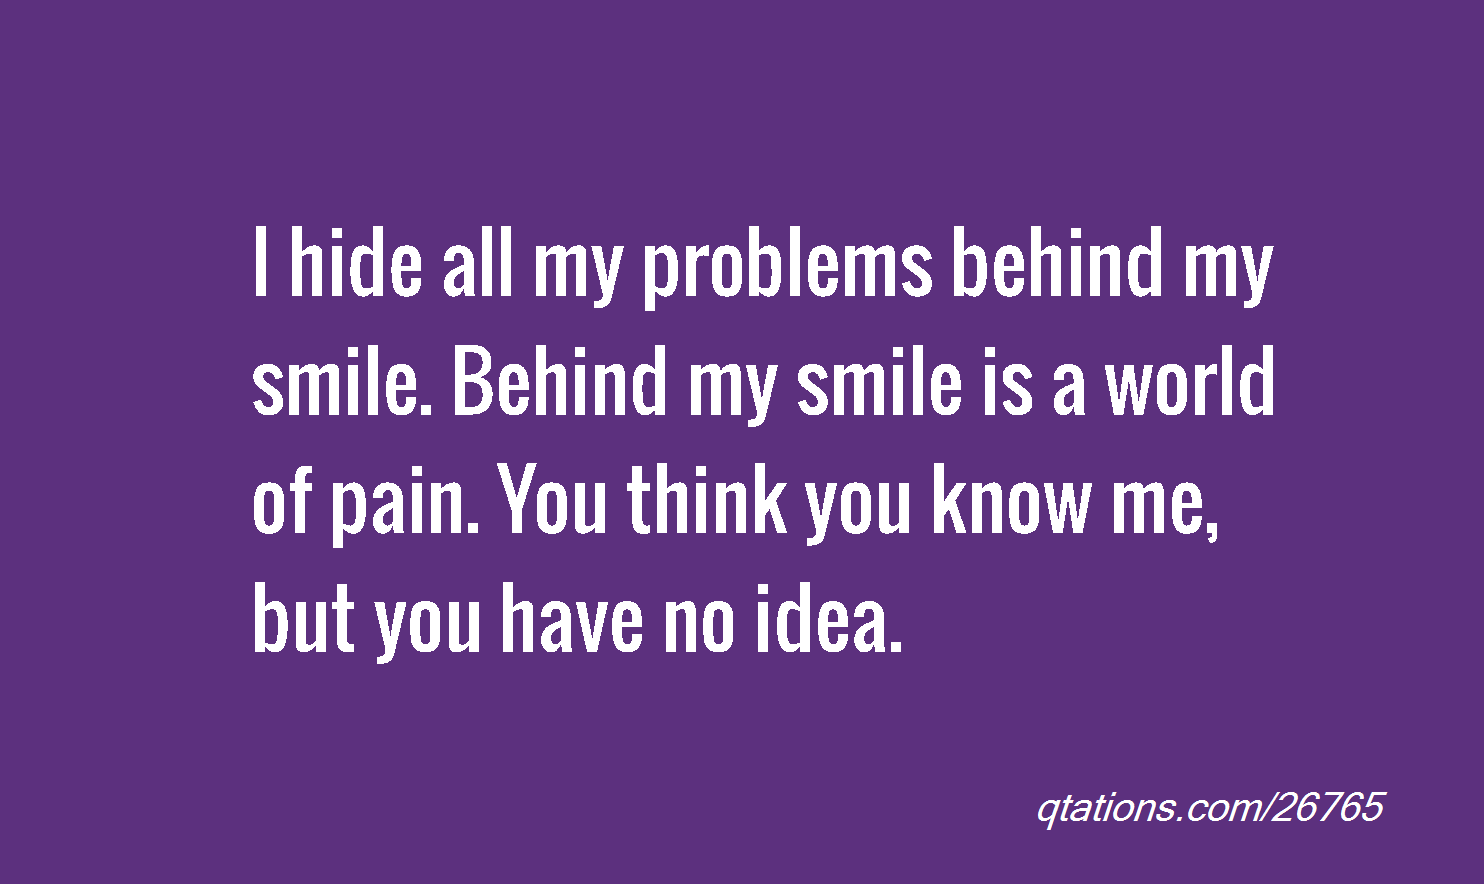 Smile And Think About Me Quotes. QuotesGram